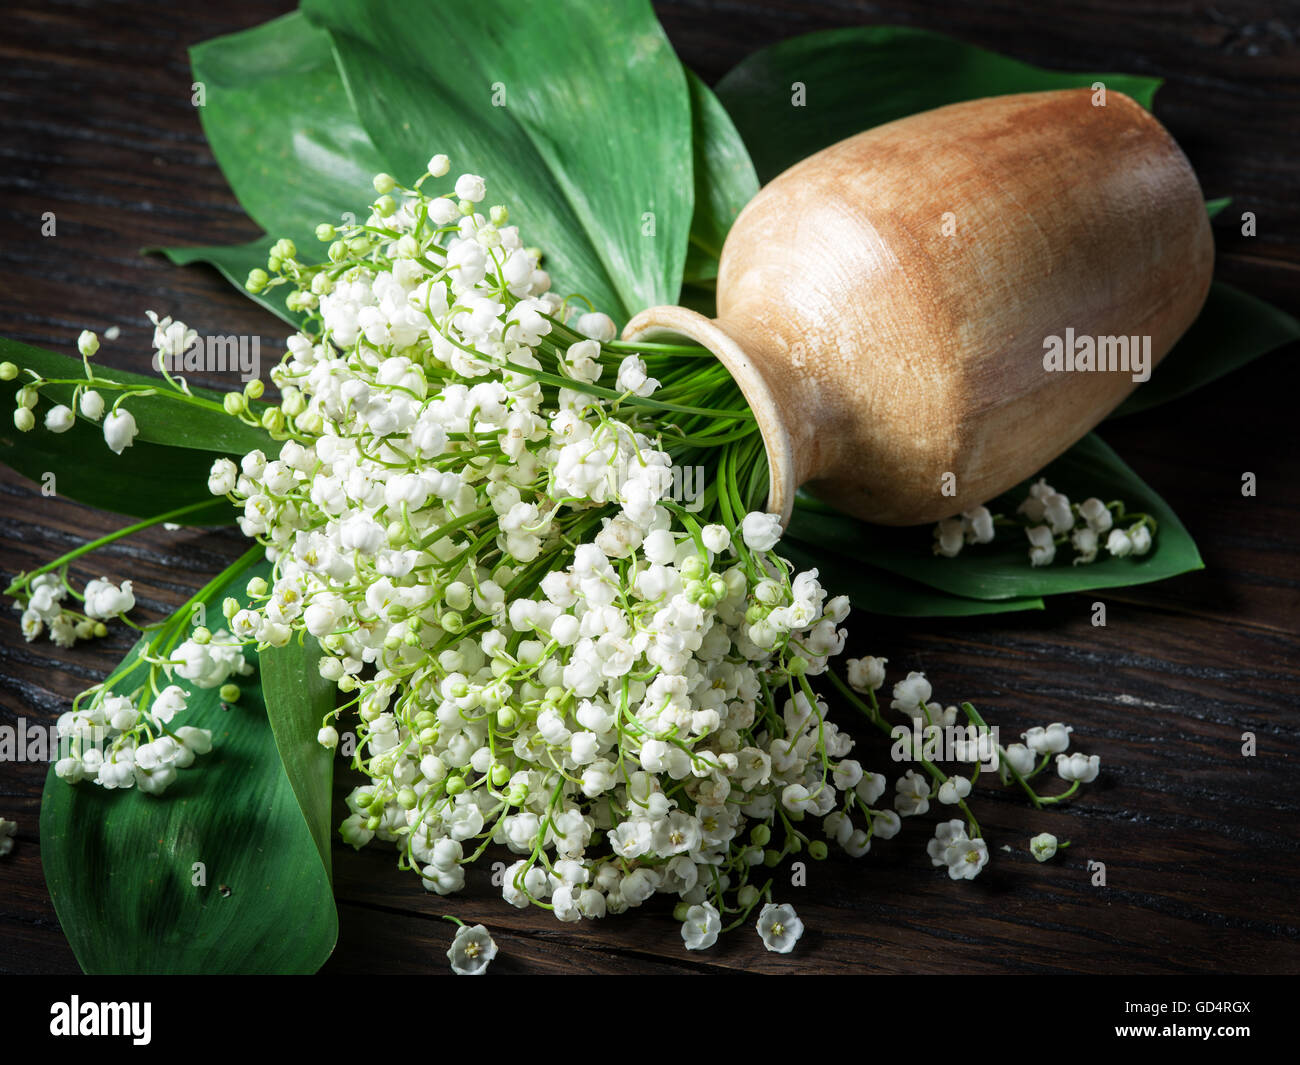 Lily of the valley bouquet on the wooden table. Stock Photo